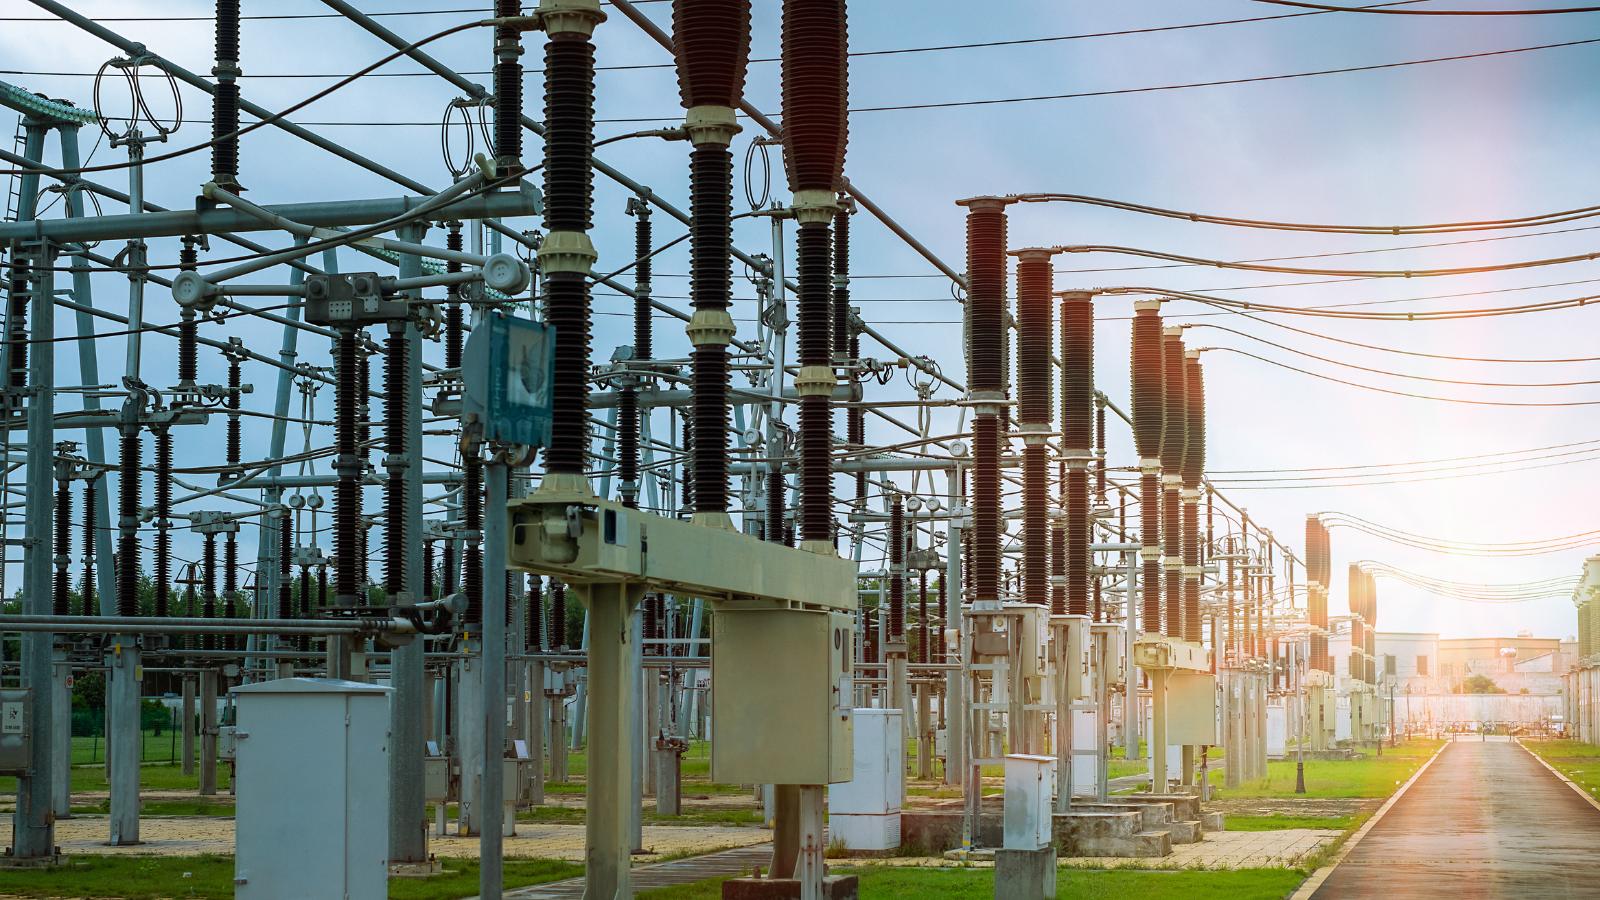 The ZEPAS project, developed by Elewit and Arteche, is a sustainable alternative that allows quickly powering substation auxiliary services with zero emissions.